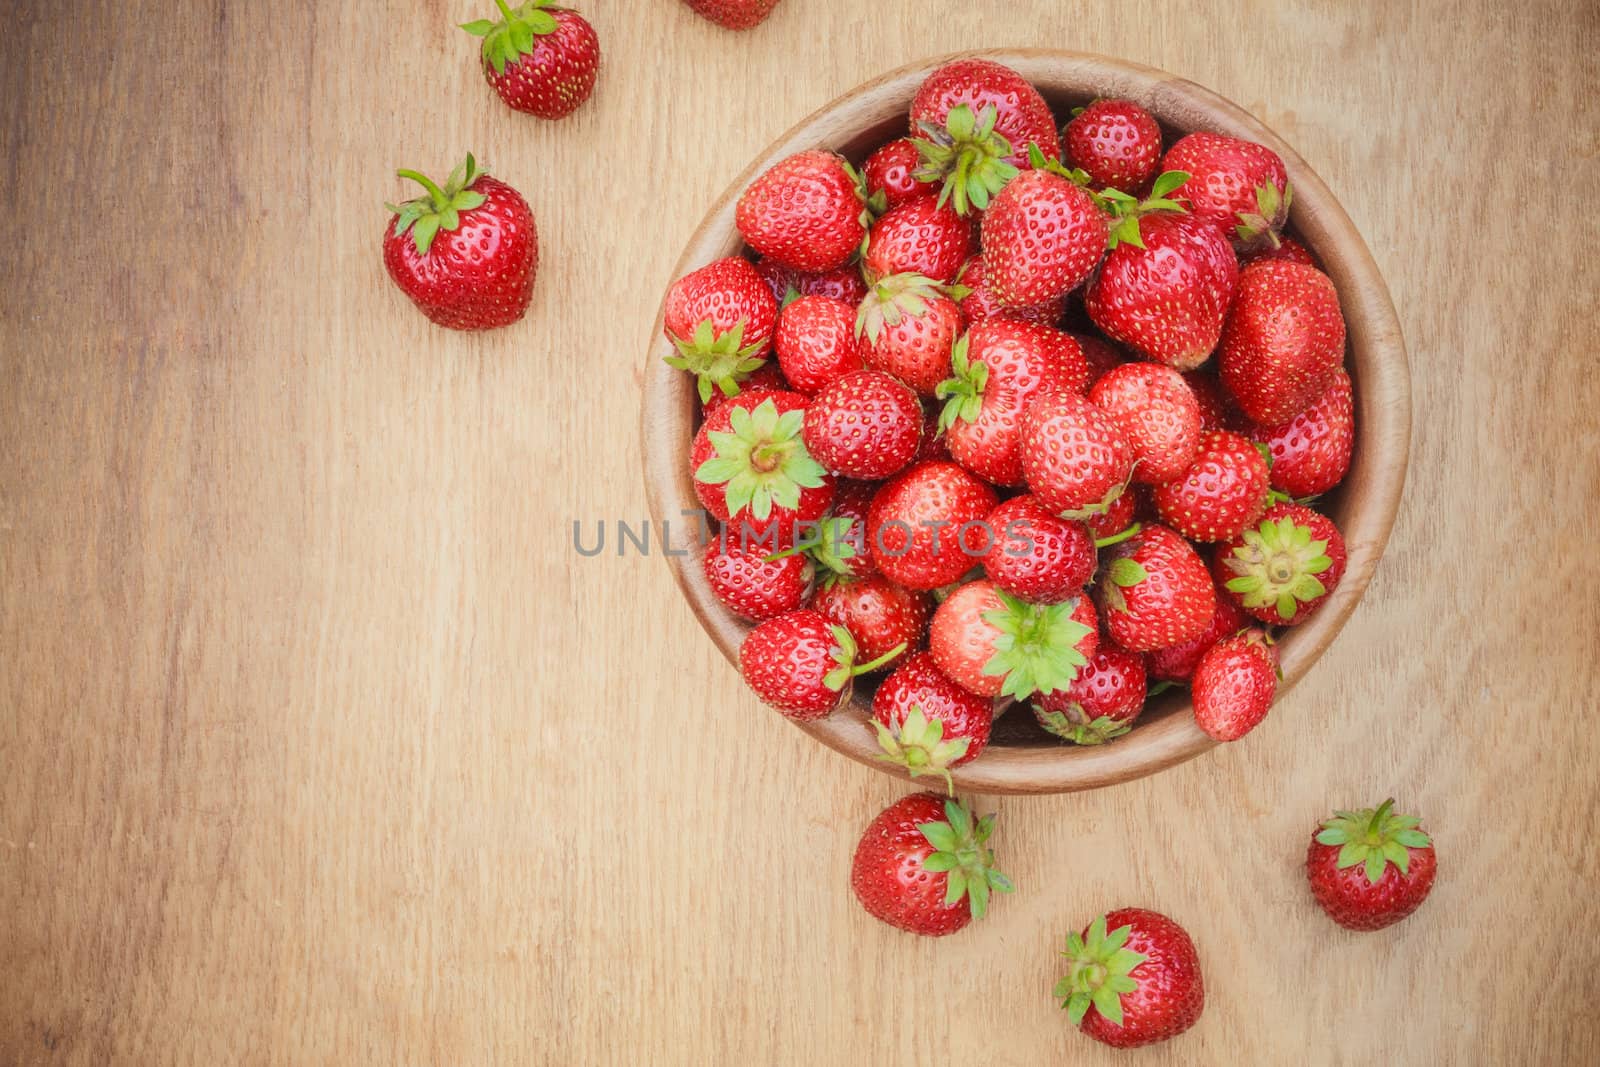 Old Wooden Bowl Filled With Succulent Juicy Fresh Ripe Red Strawberries On An Old Table top